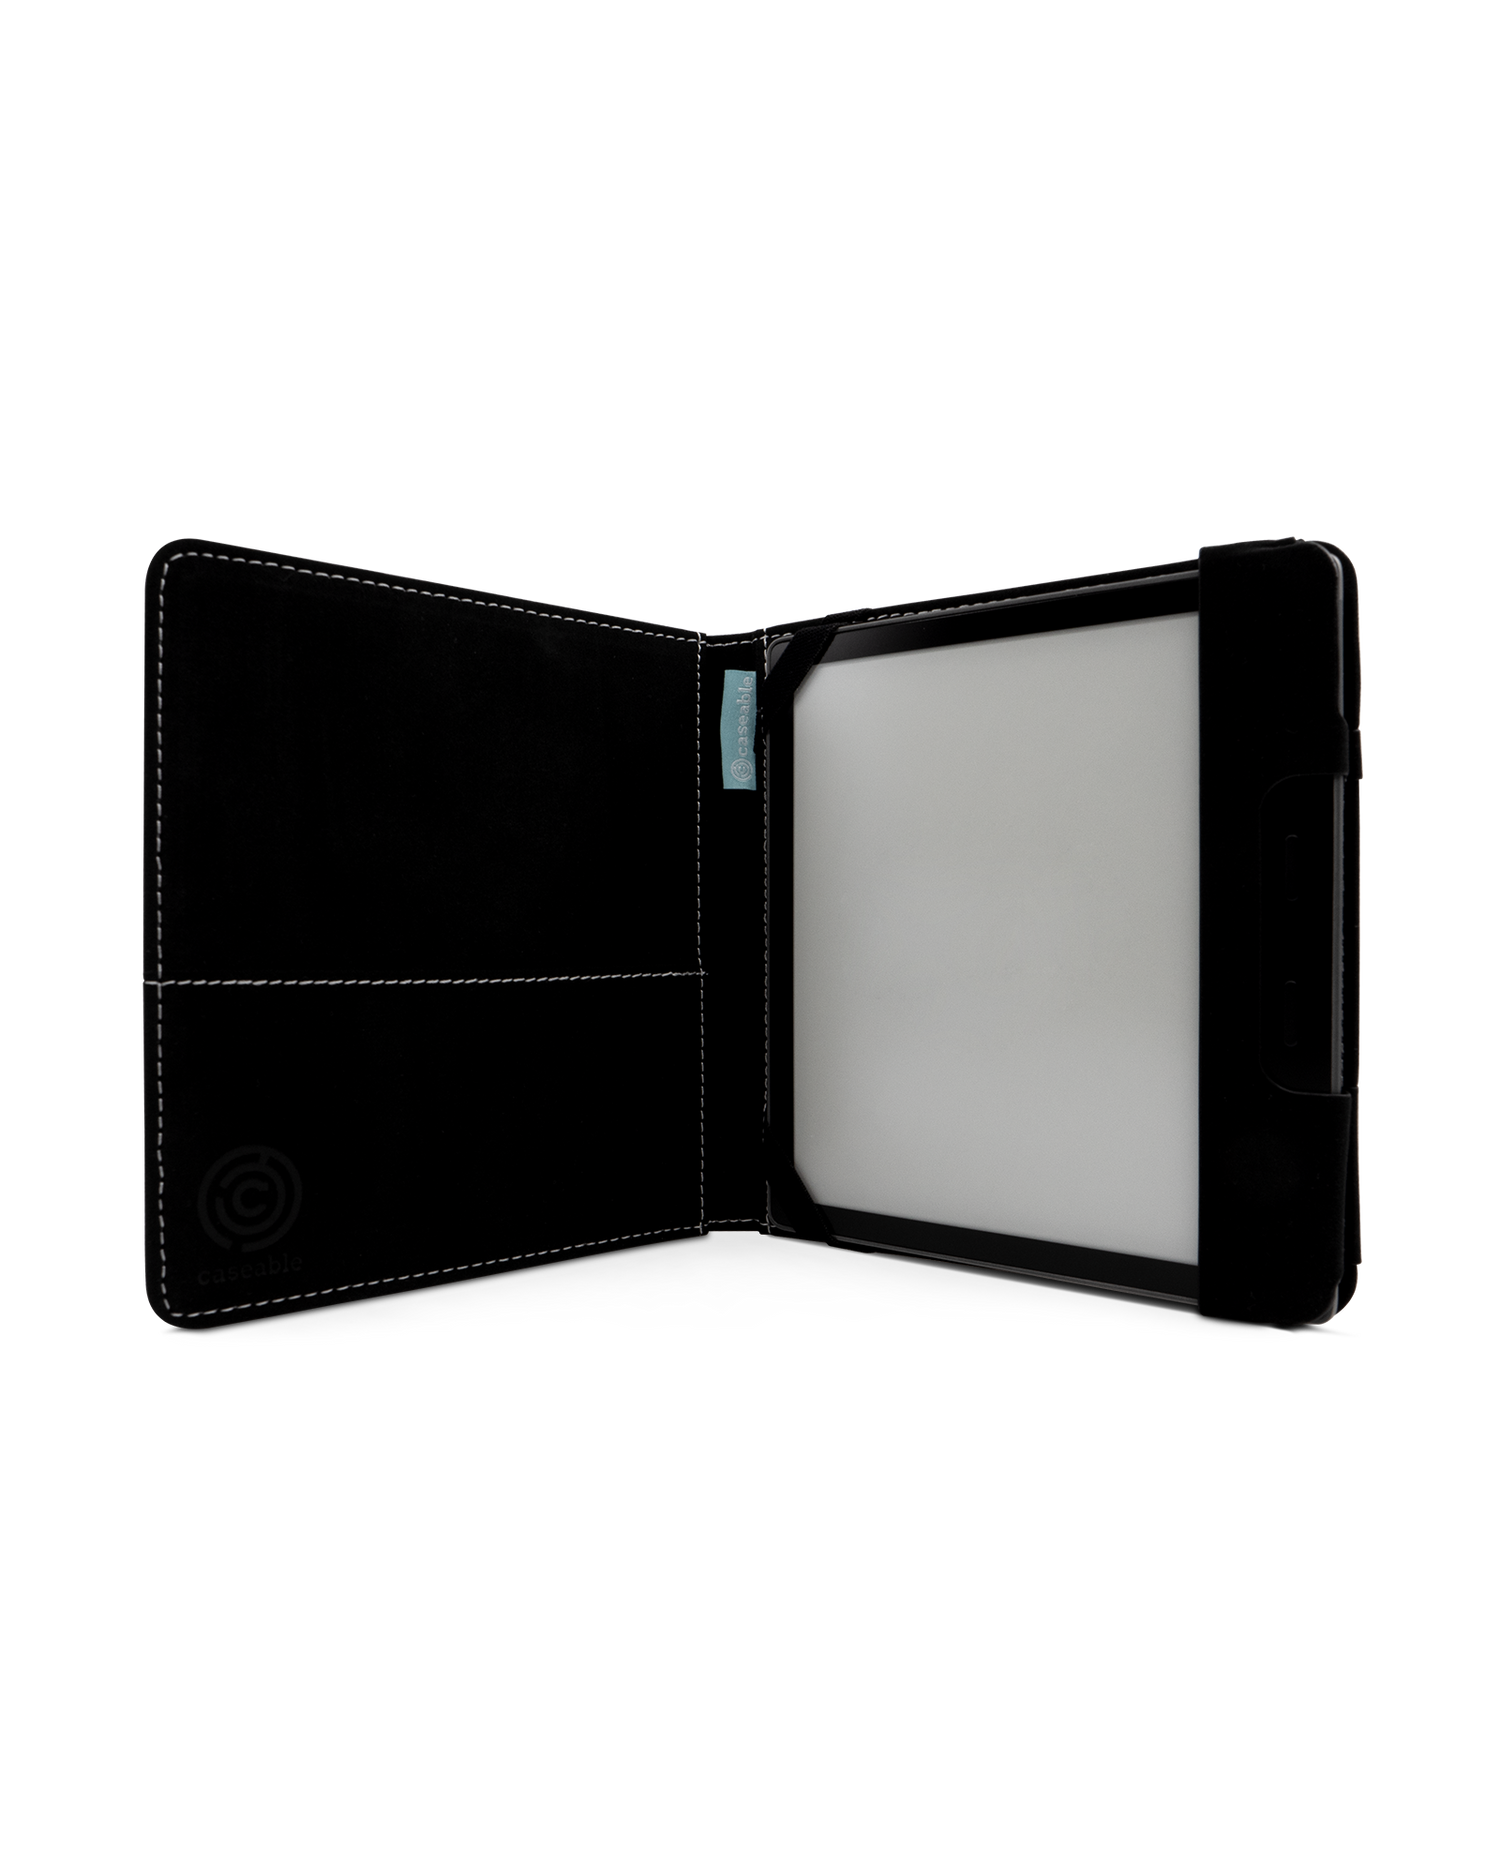 Classy Sassy eReader Case for tolino vision 6: Opened interior view